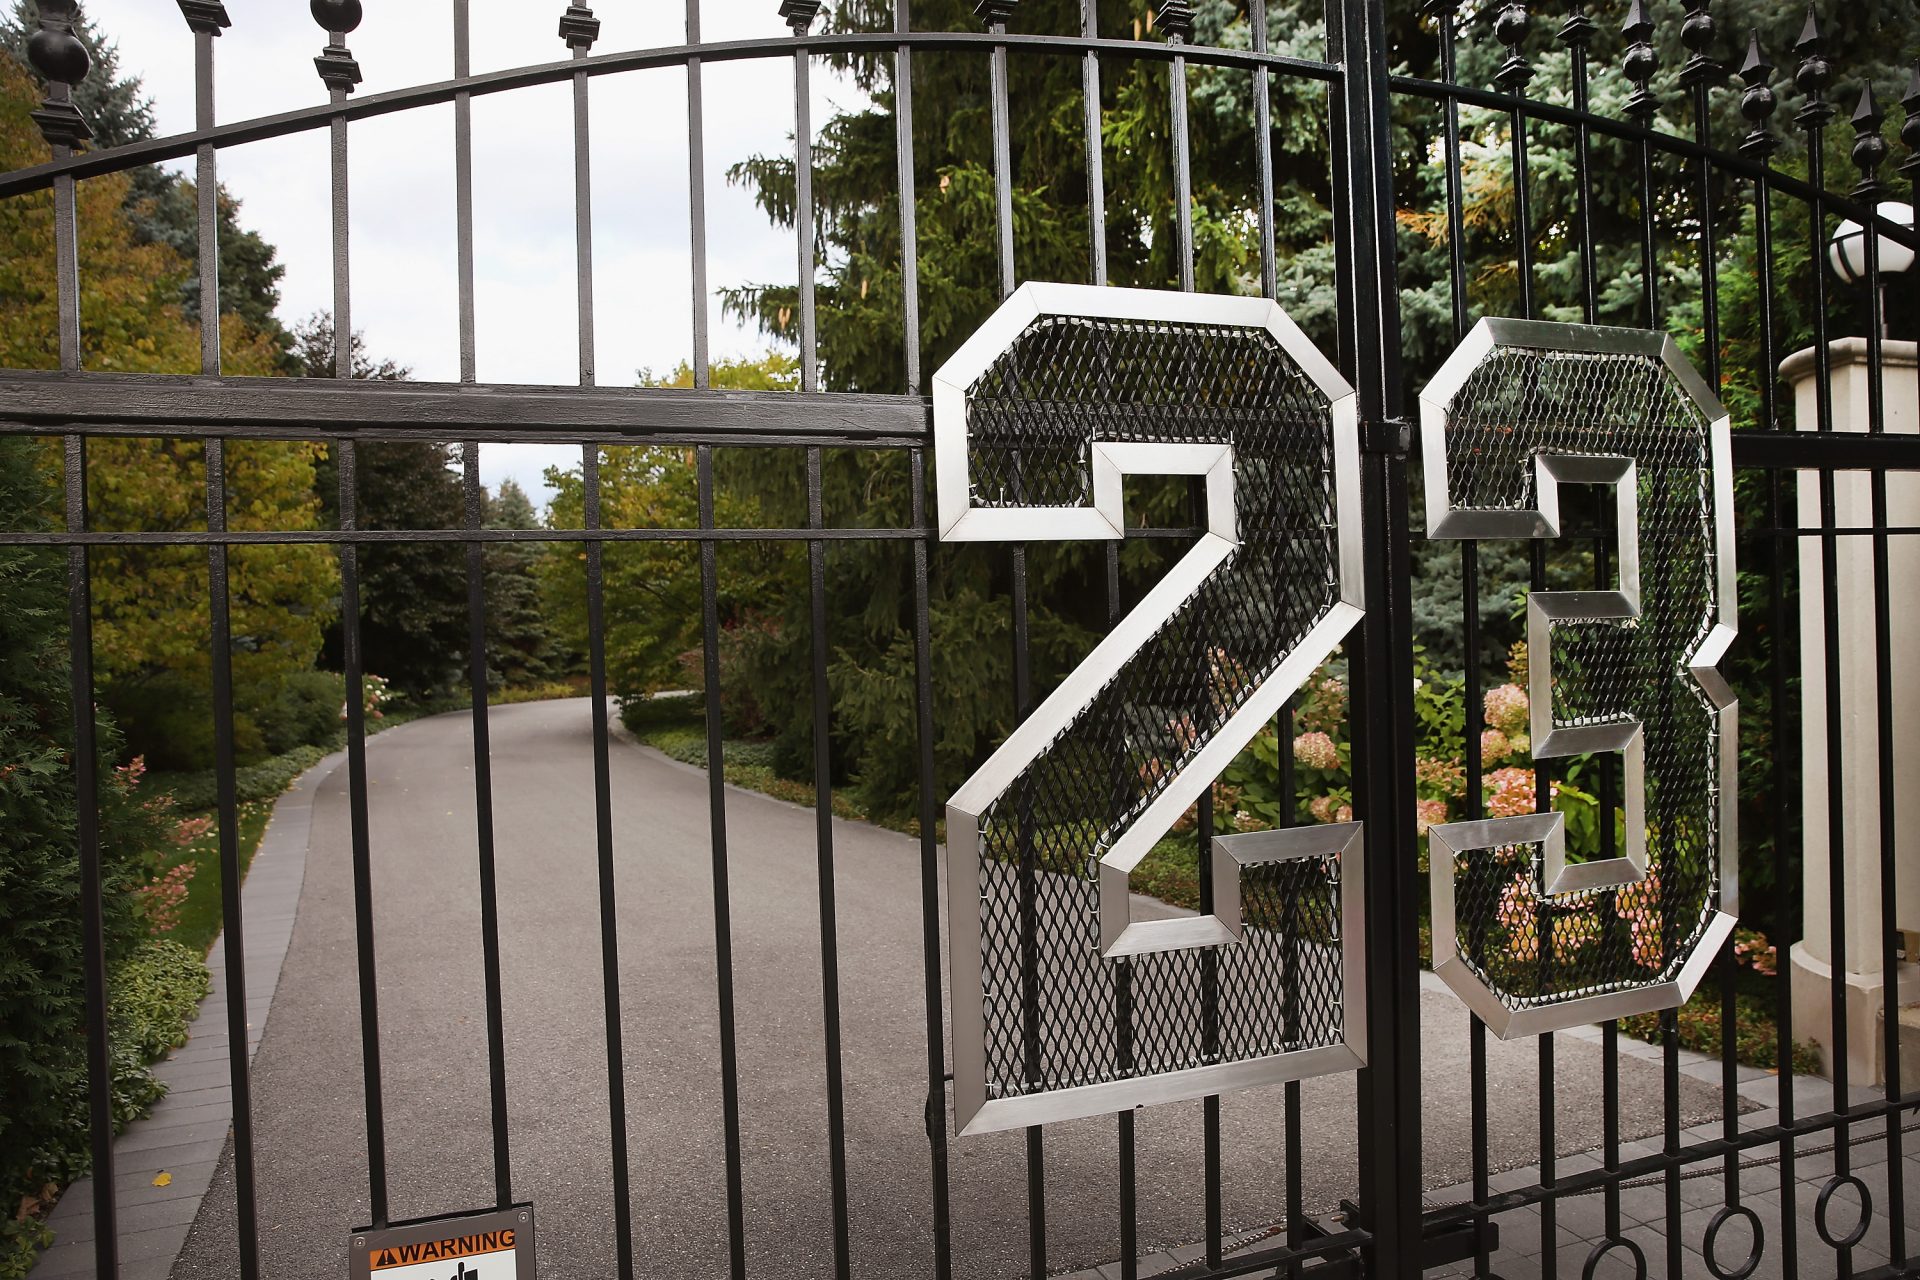 What's going on with Michael Jordan's 'cursed' mansion?